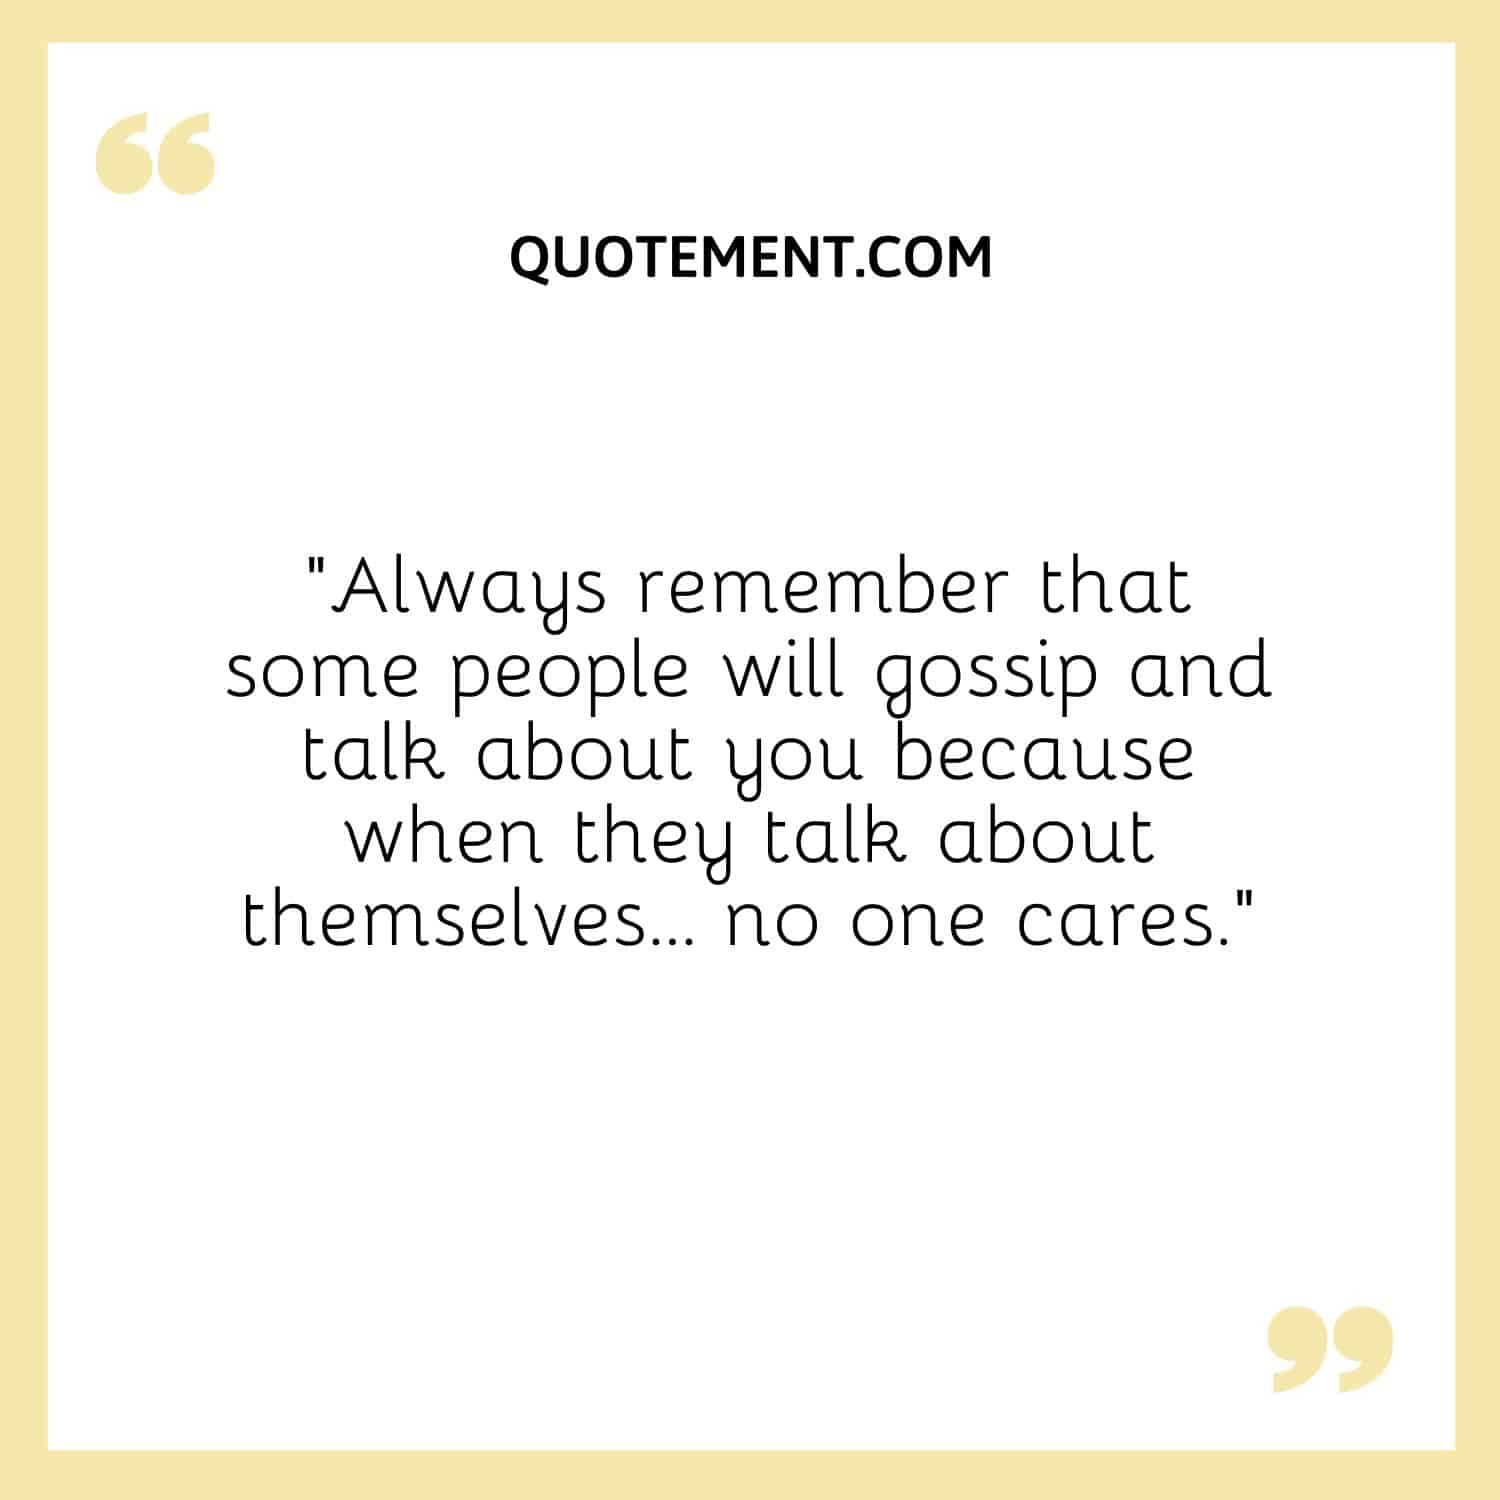 “Always remember that some people will gossip and talk about you because when they talk about themselves... no one cares.”